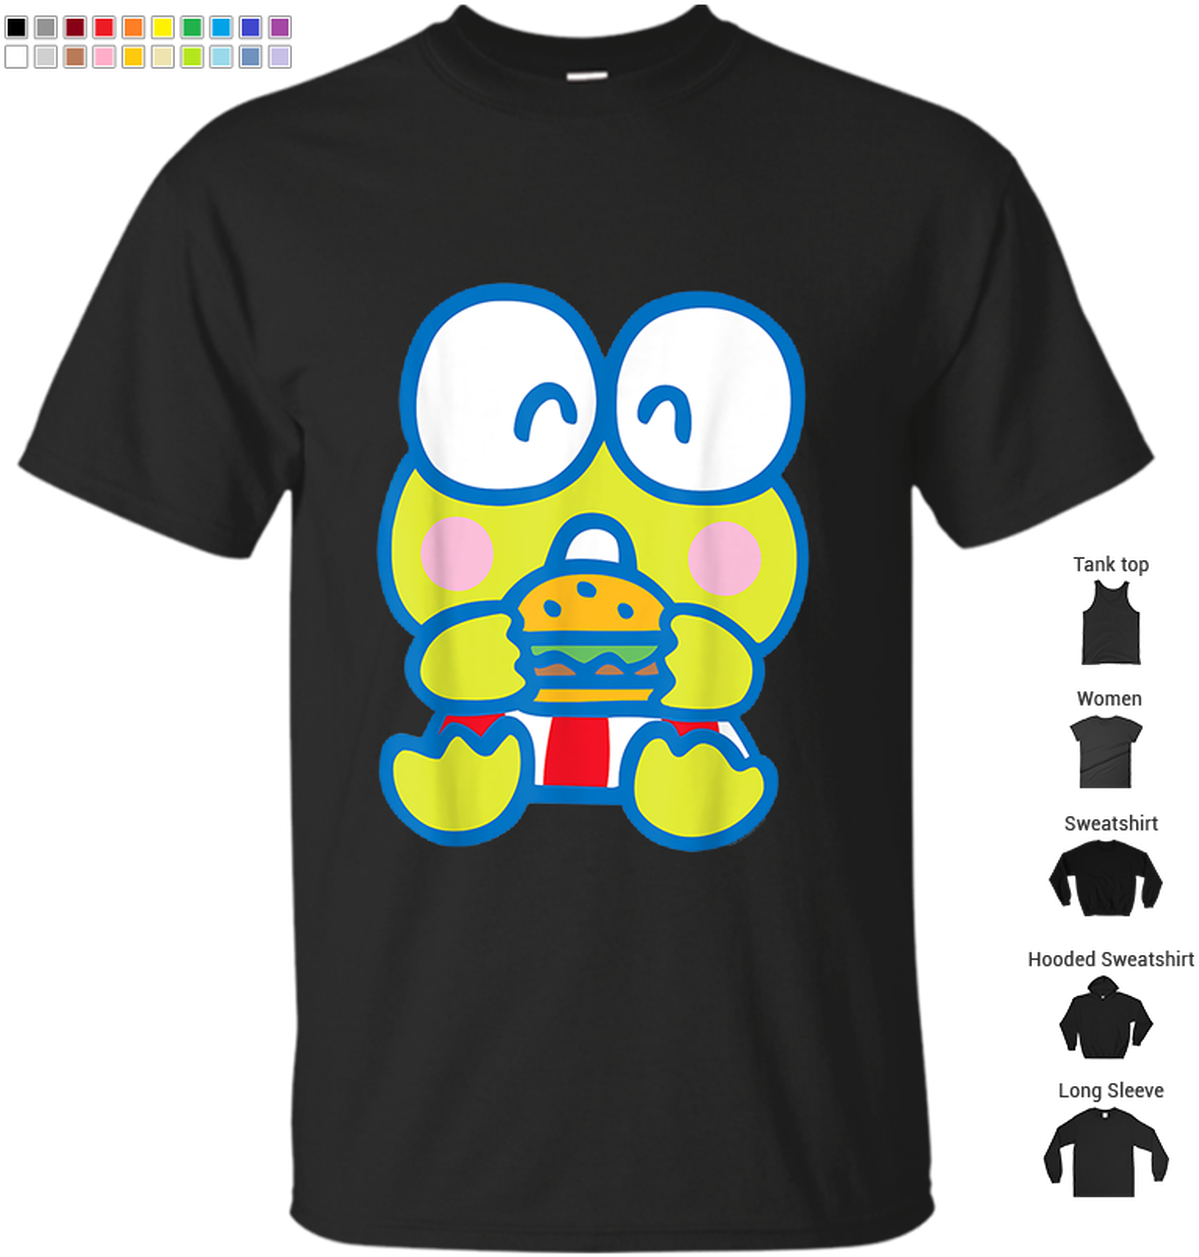 A Black T-shirt With A Cartoon Character